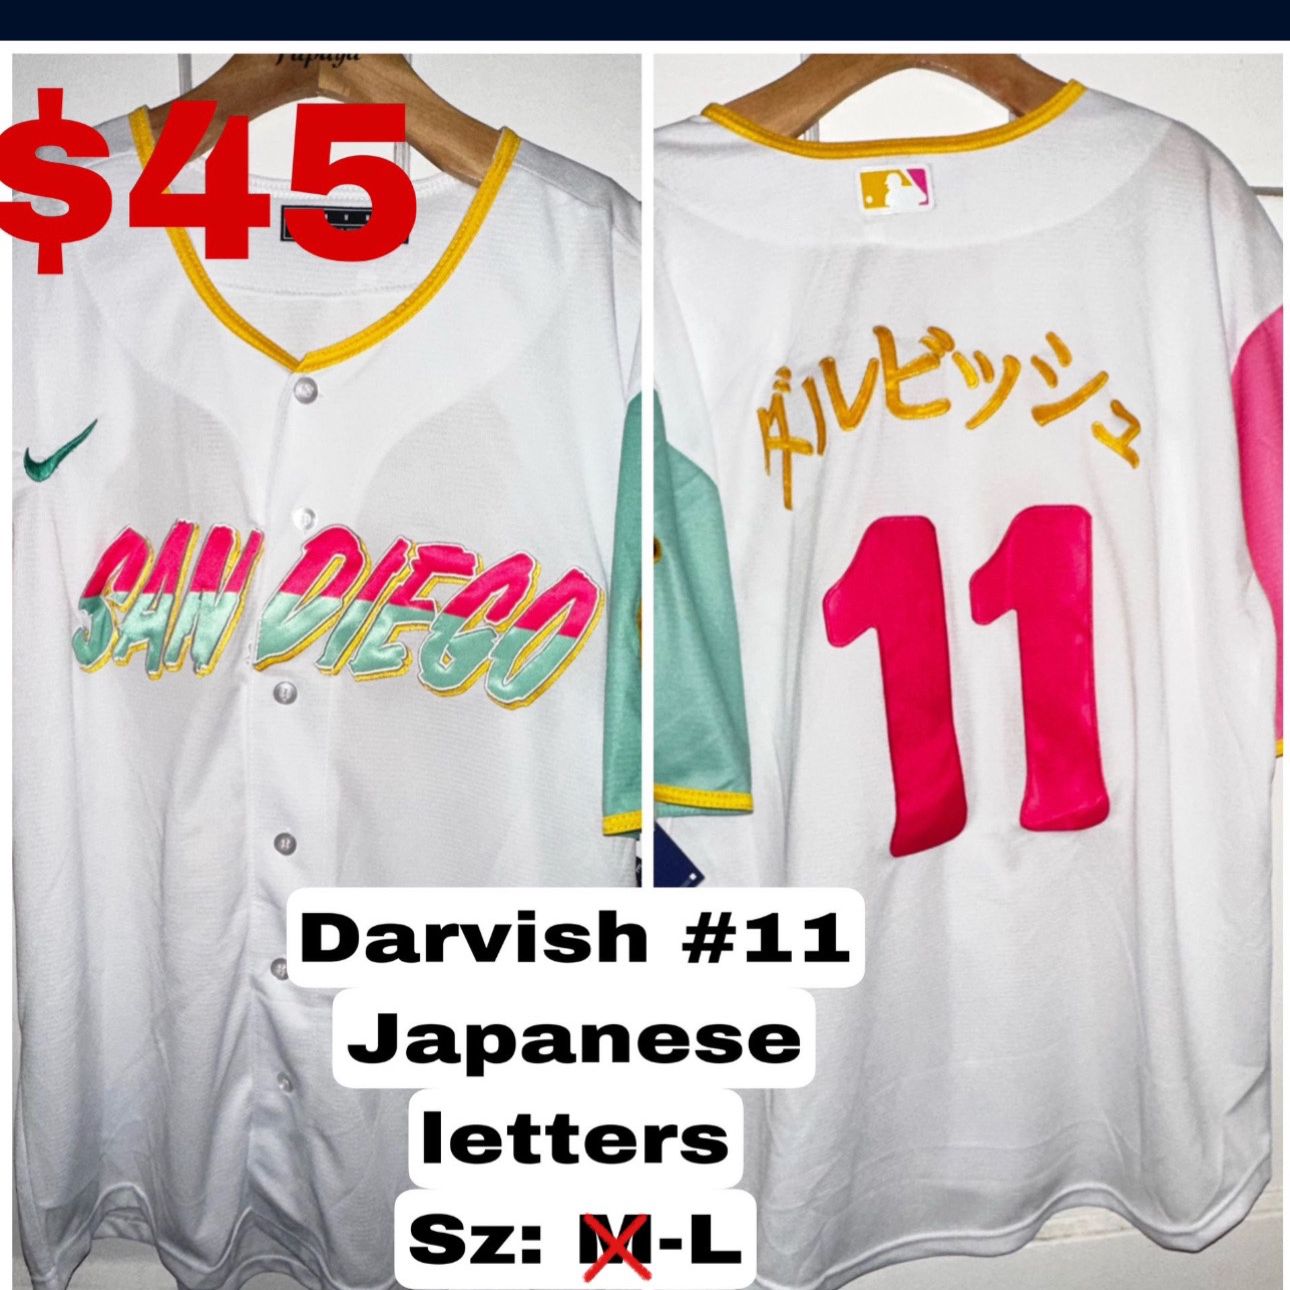 San Diego Padres Jersey Darvish-city Connect Sz:M-L Japanese Letters for  Sale in Chula Vista, CA - OfferUp